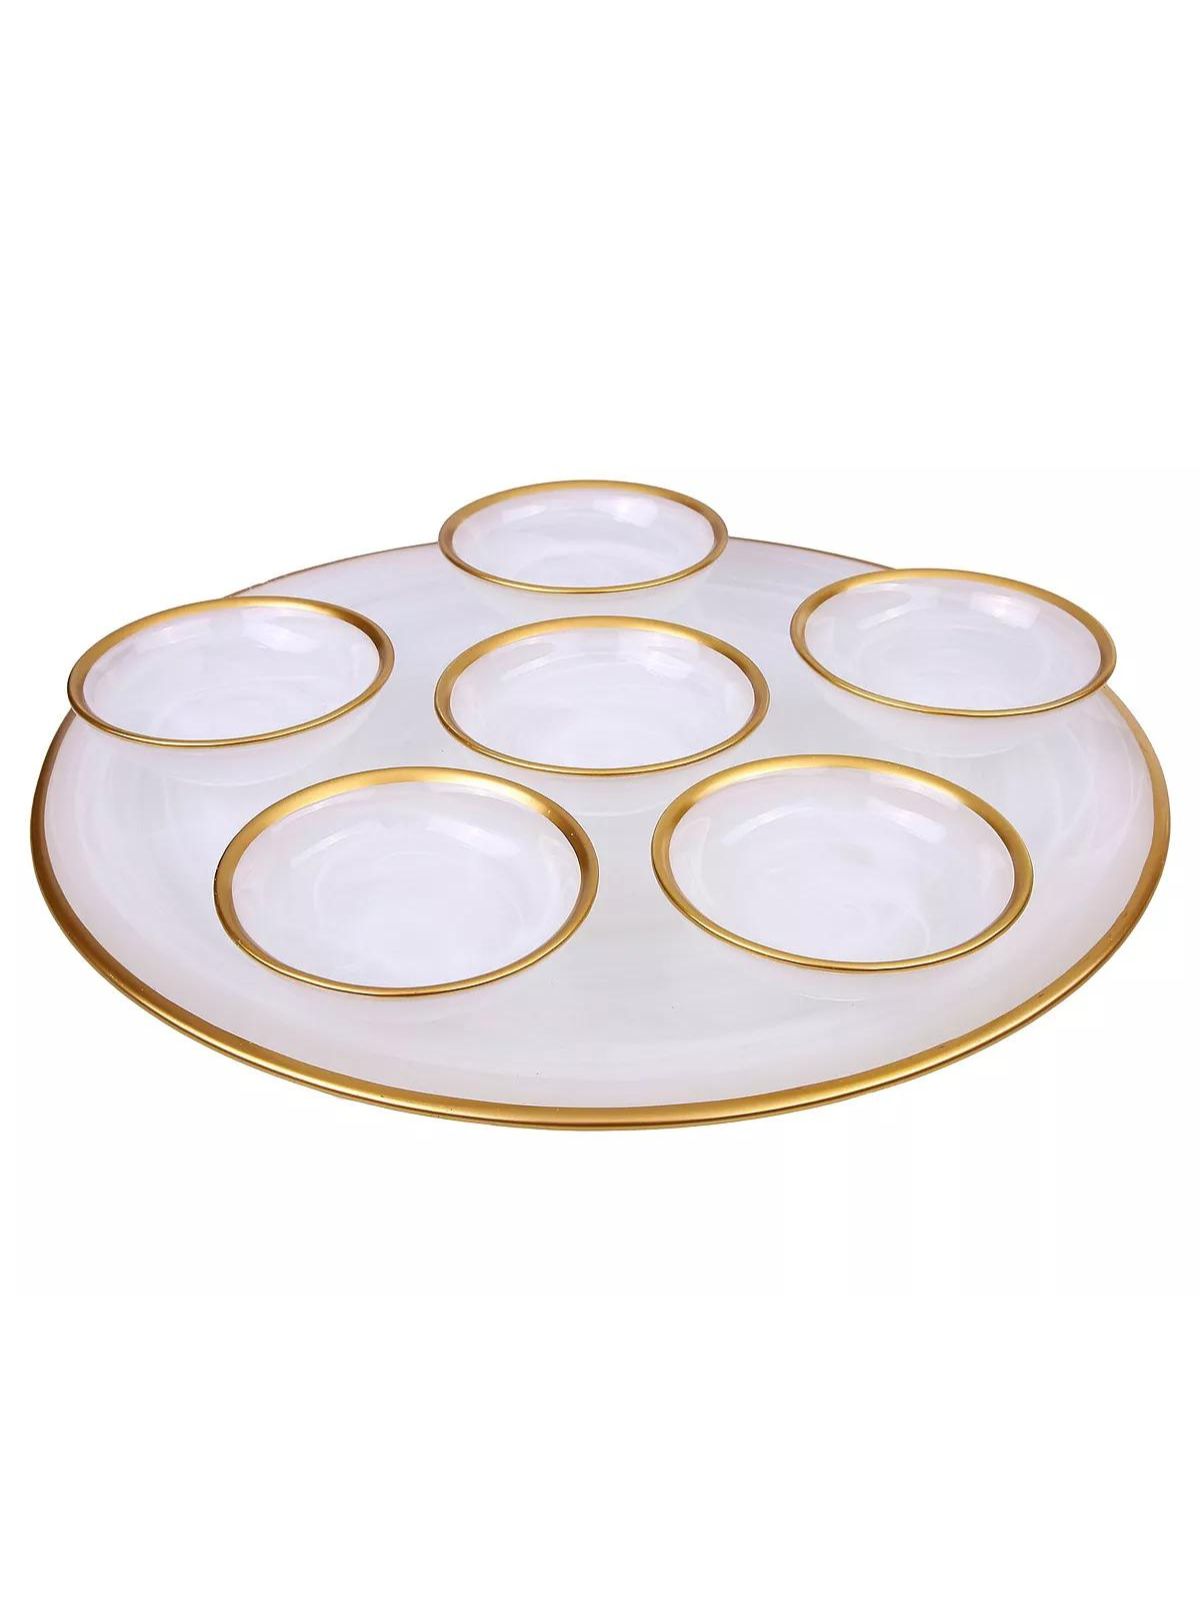 White Alabaster Glass Tray with Gold Rim and 6 Bowls sold by KYA Home Decor.